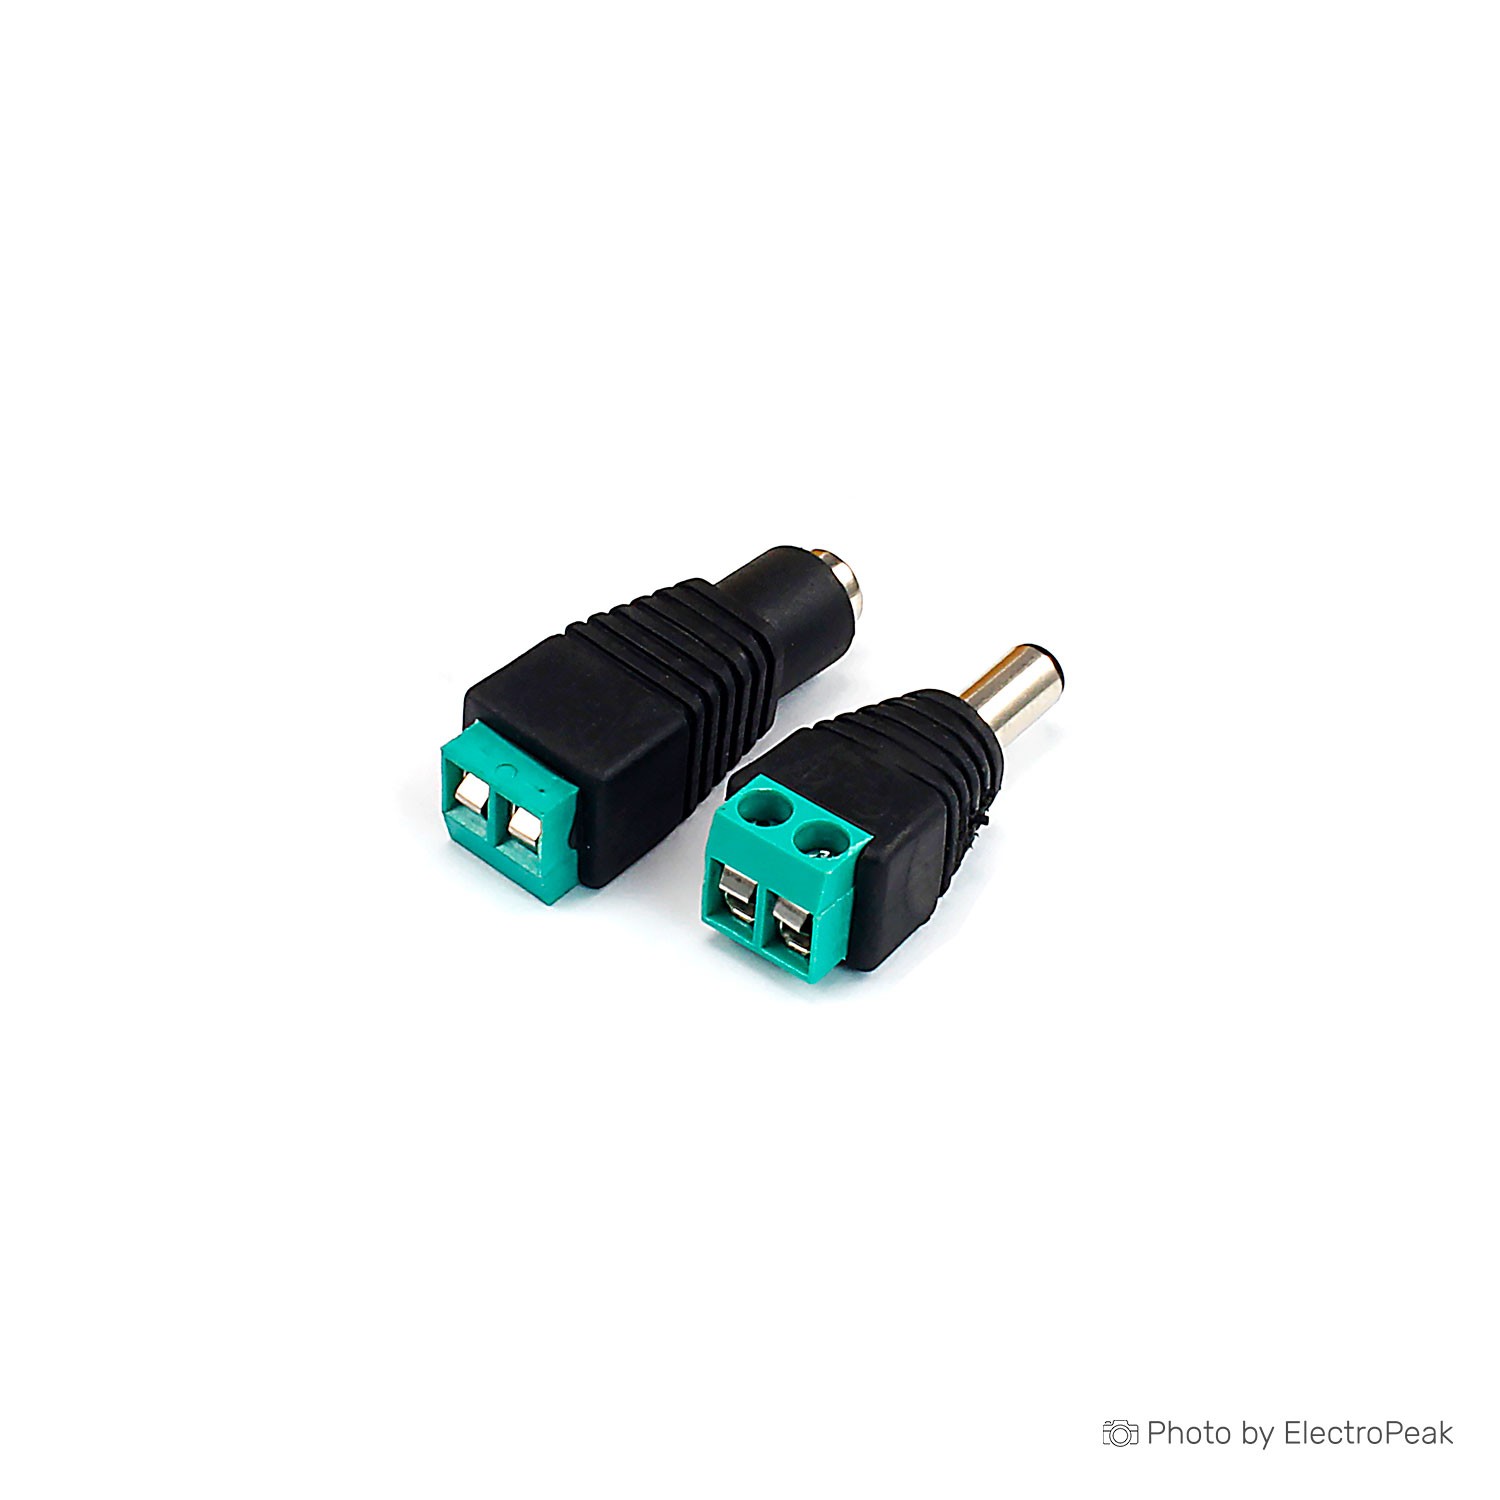 DC Power Plug Jack Adapter - 5.5x2.1mm, Male to Female